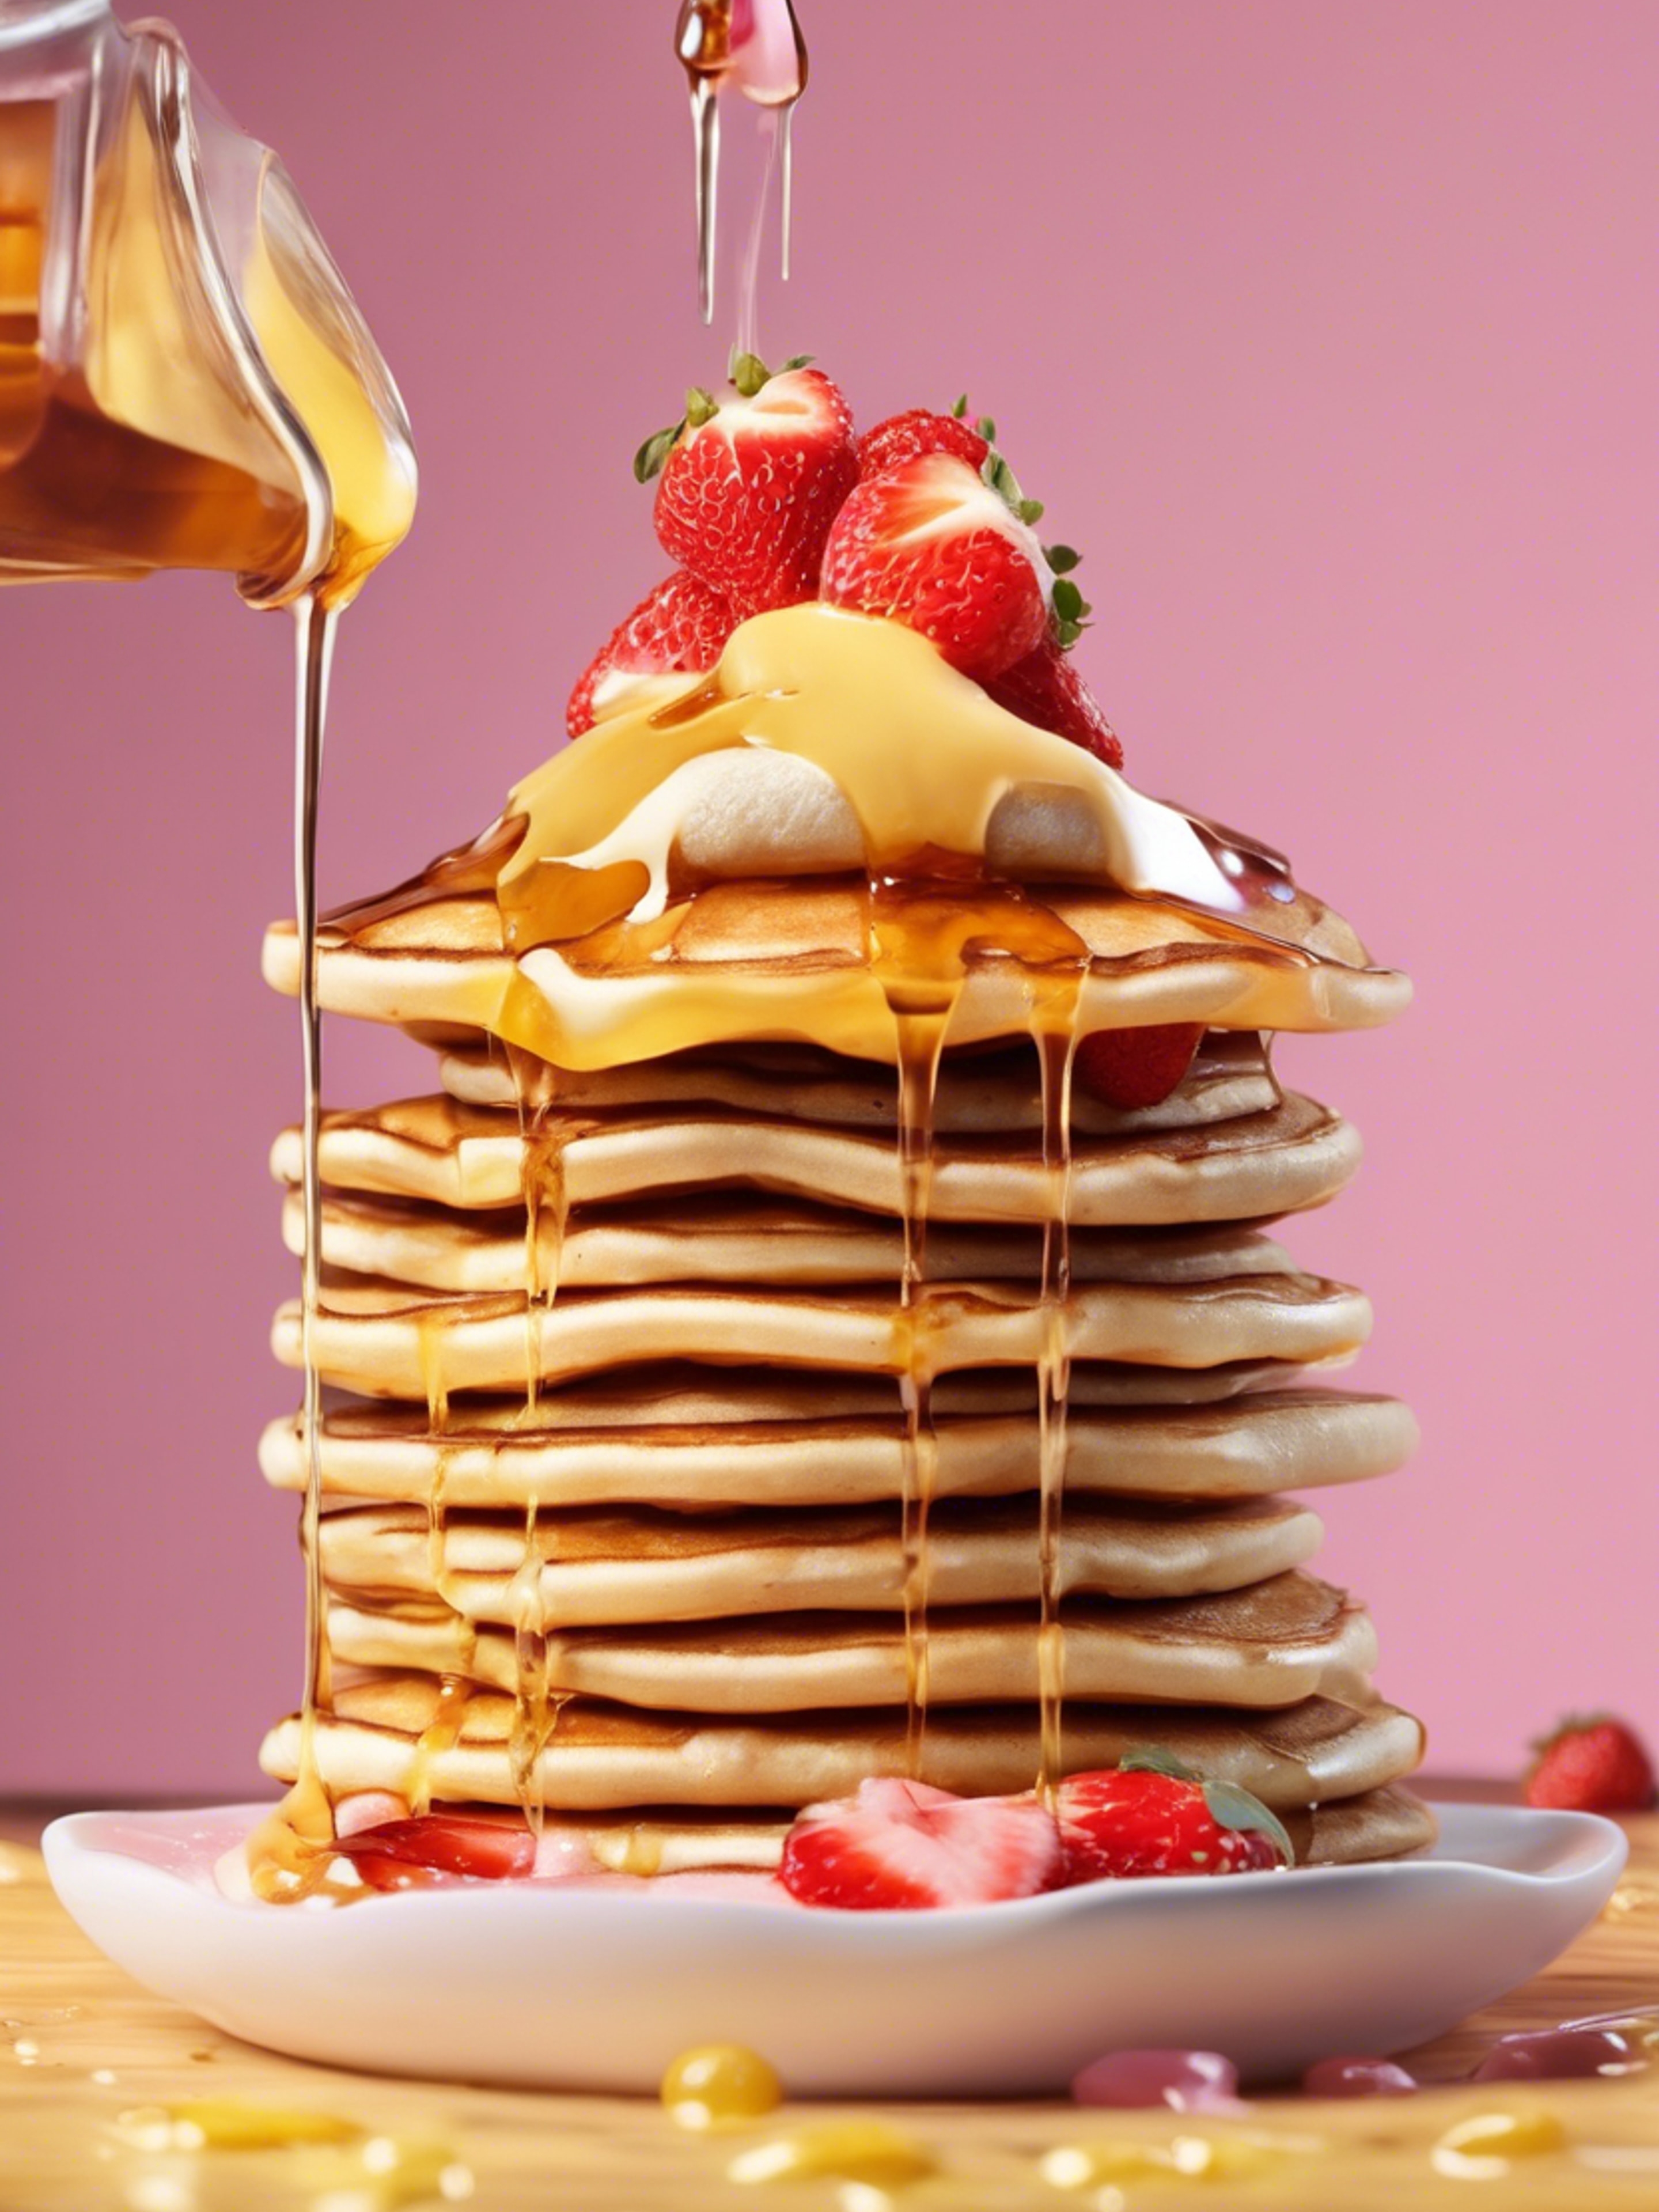 Beige kawaii pancakes stacked with a melted butter and syrup, topped with mini strawberry slices. Divar kağızı[6cf29e03a904430684e0]